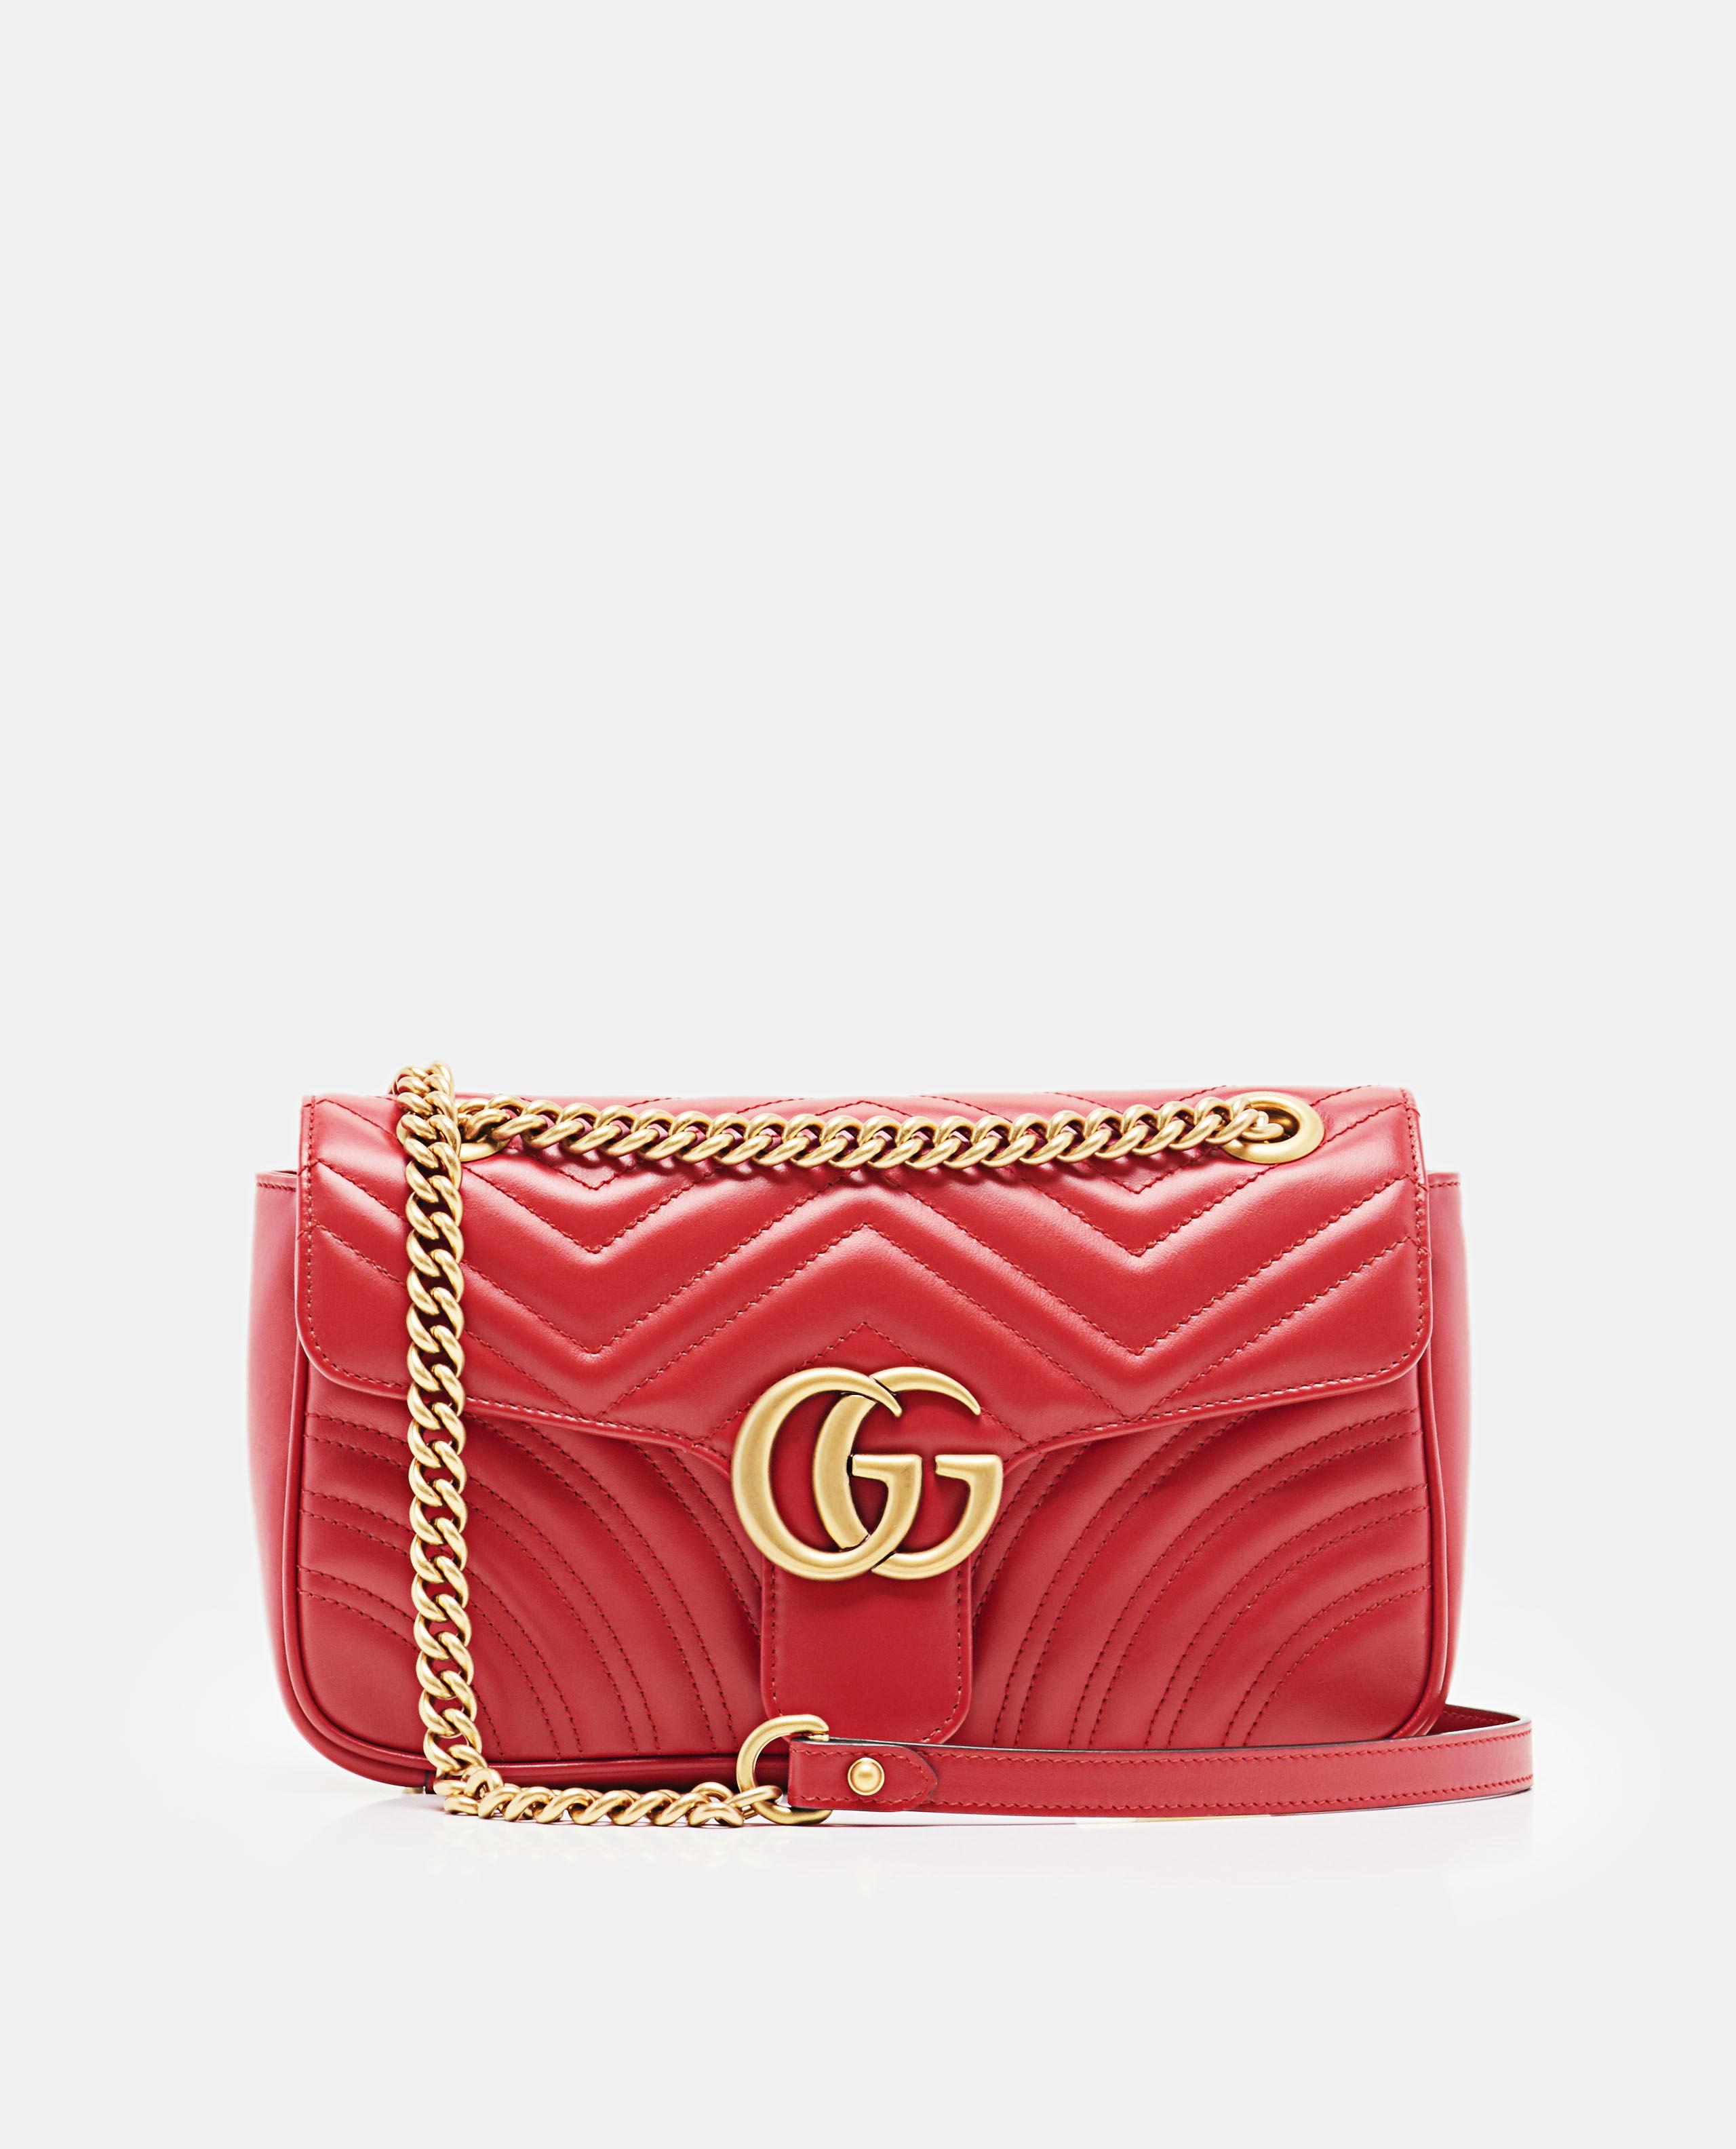 Gucci Dtdit Small Marmont Bag Red | NAR Media Kit